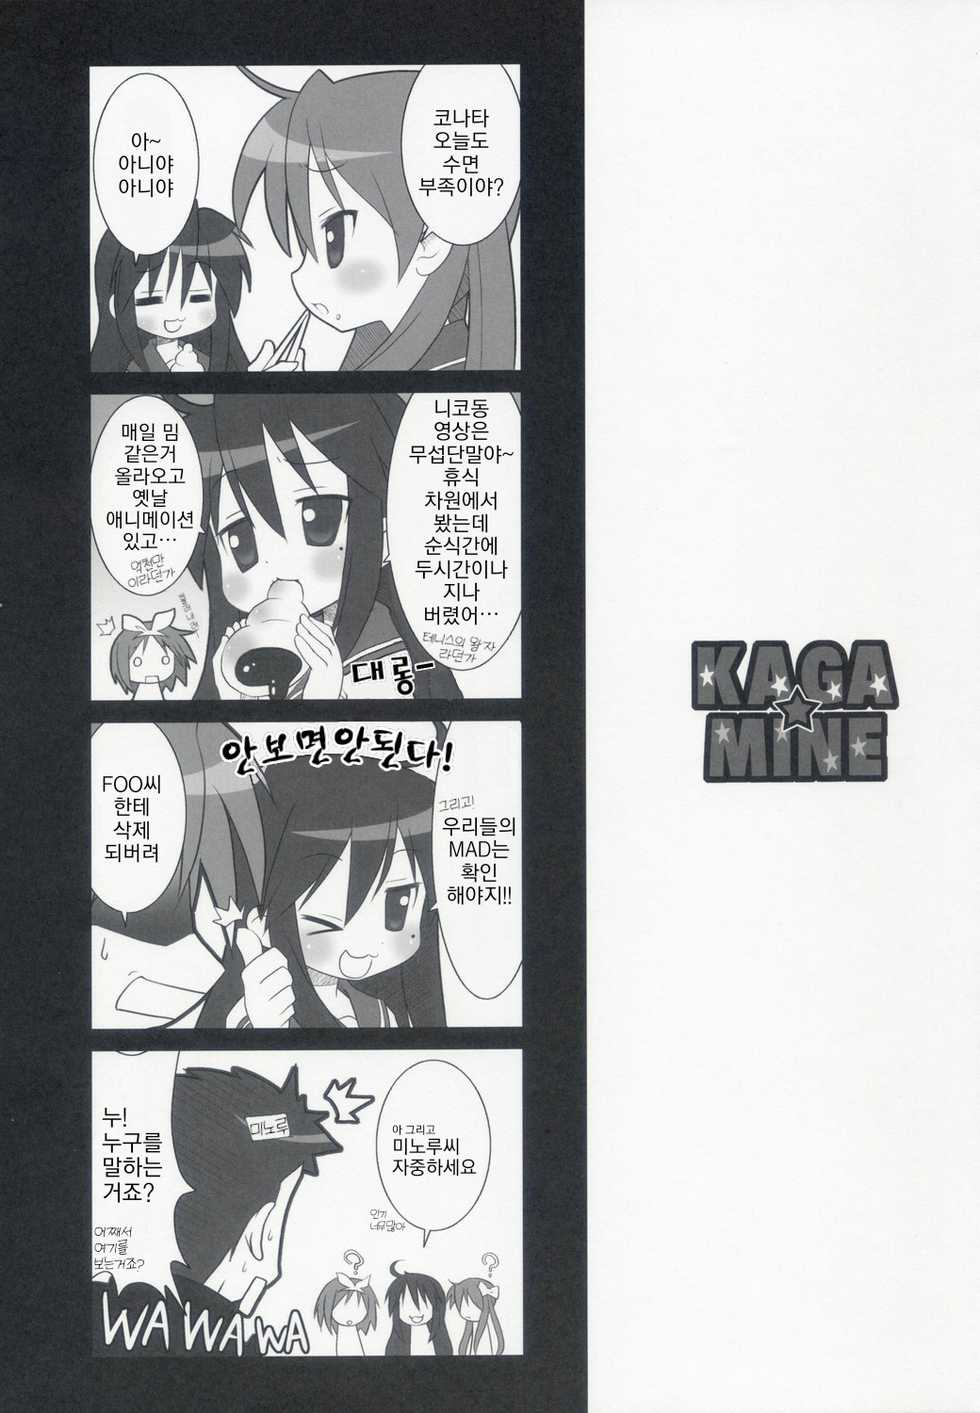 (Puniket 15) [Oden-Ya (Misooden)] KAGA MINE (Lucky Star) [Korean] [딸기실업] - Page 20